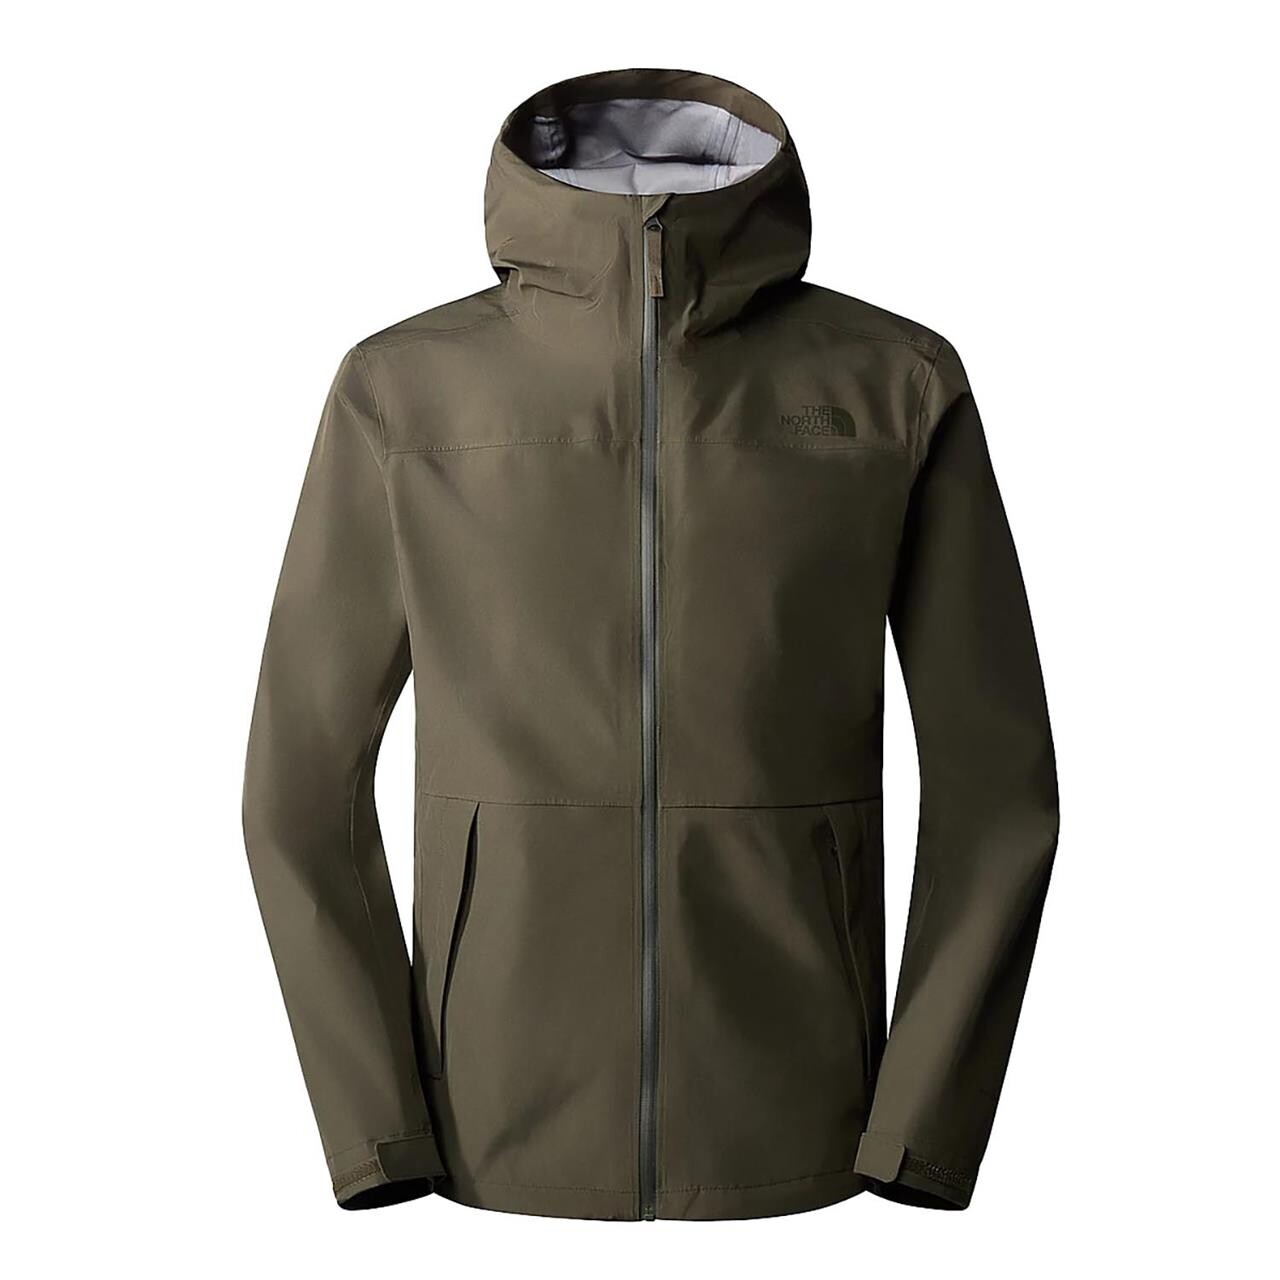 Billede af The North Face Mens Dryzzle Futurelight Jacket (Grøn (NEW TAUPE GREEN) Small)